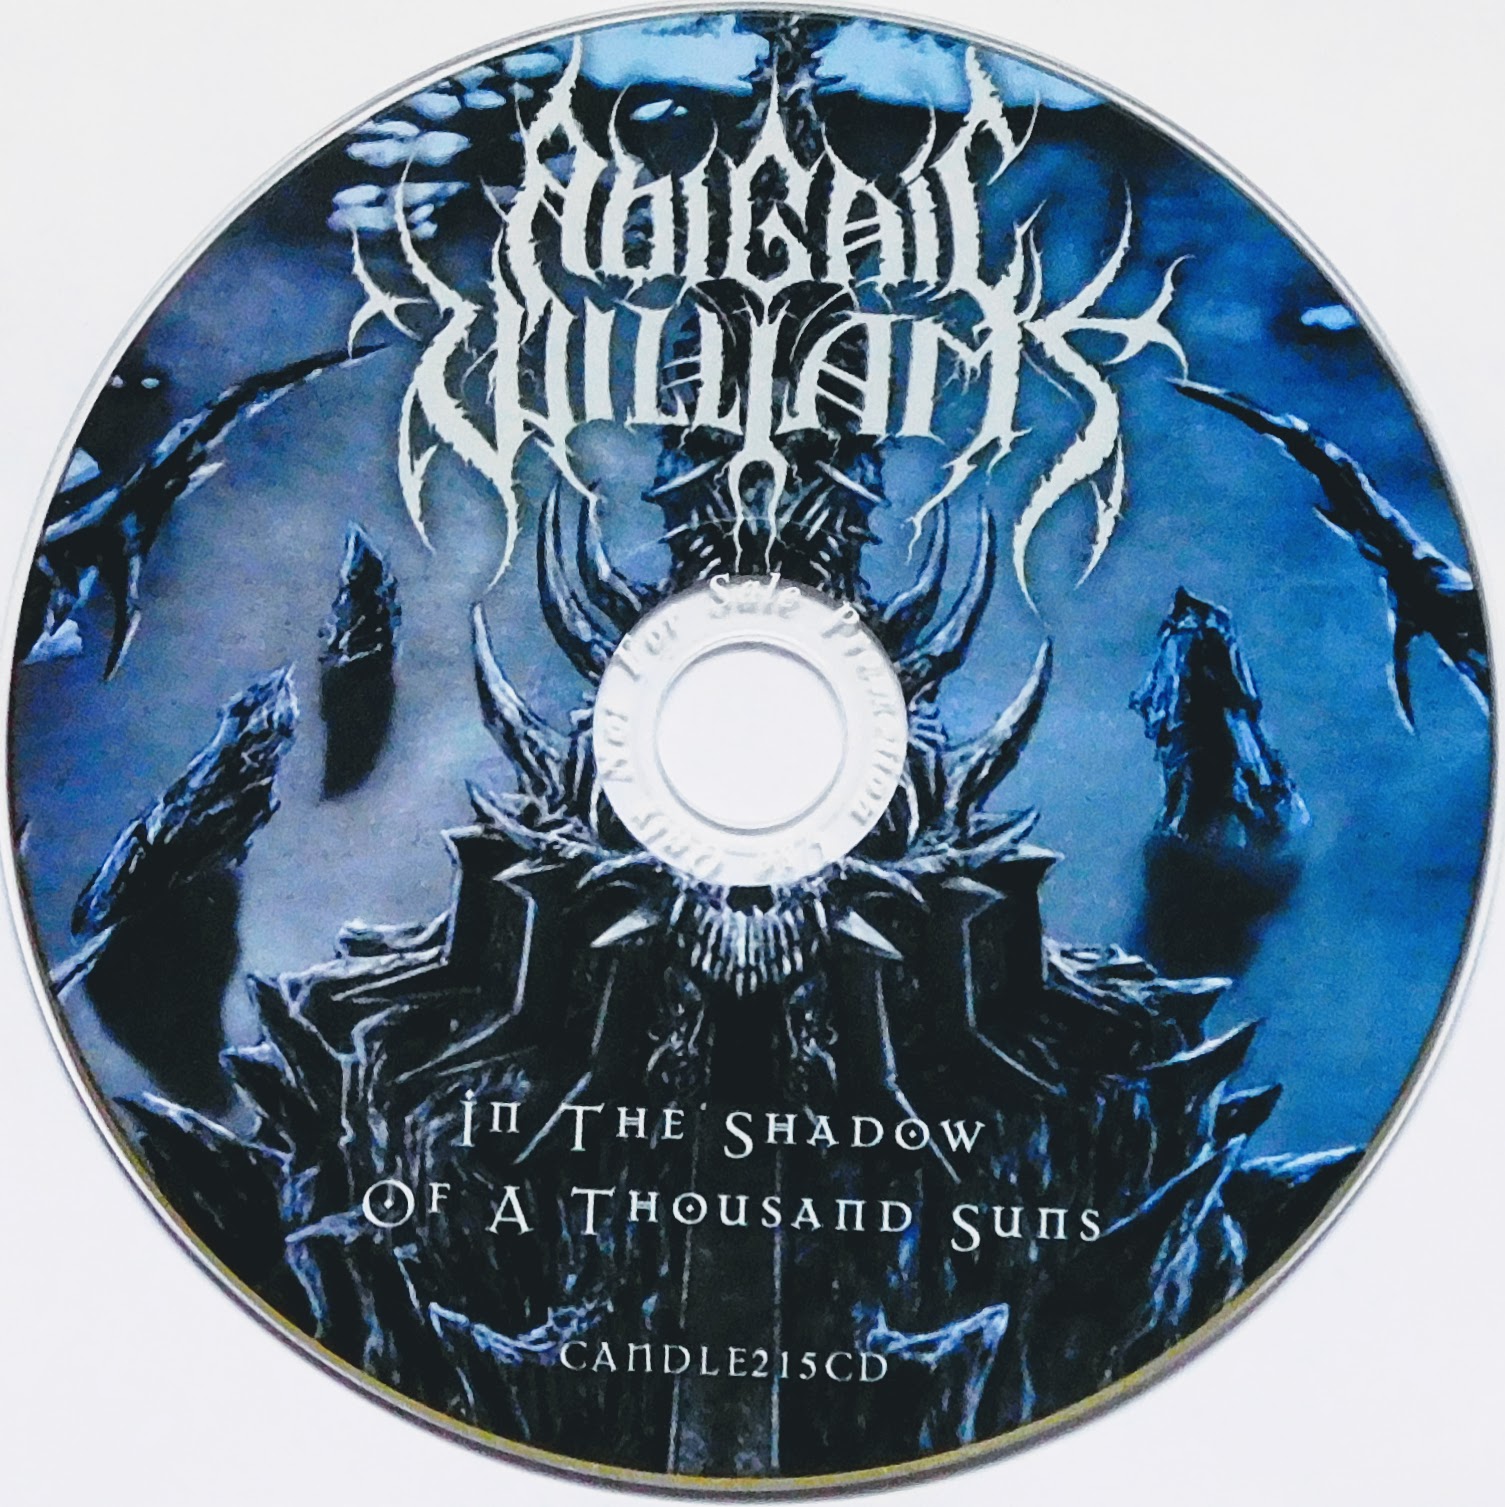 CD (Promotion) Abigail Williams - In The Shadow Of A Thousand Suns (CD Only)